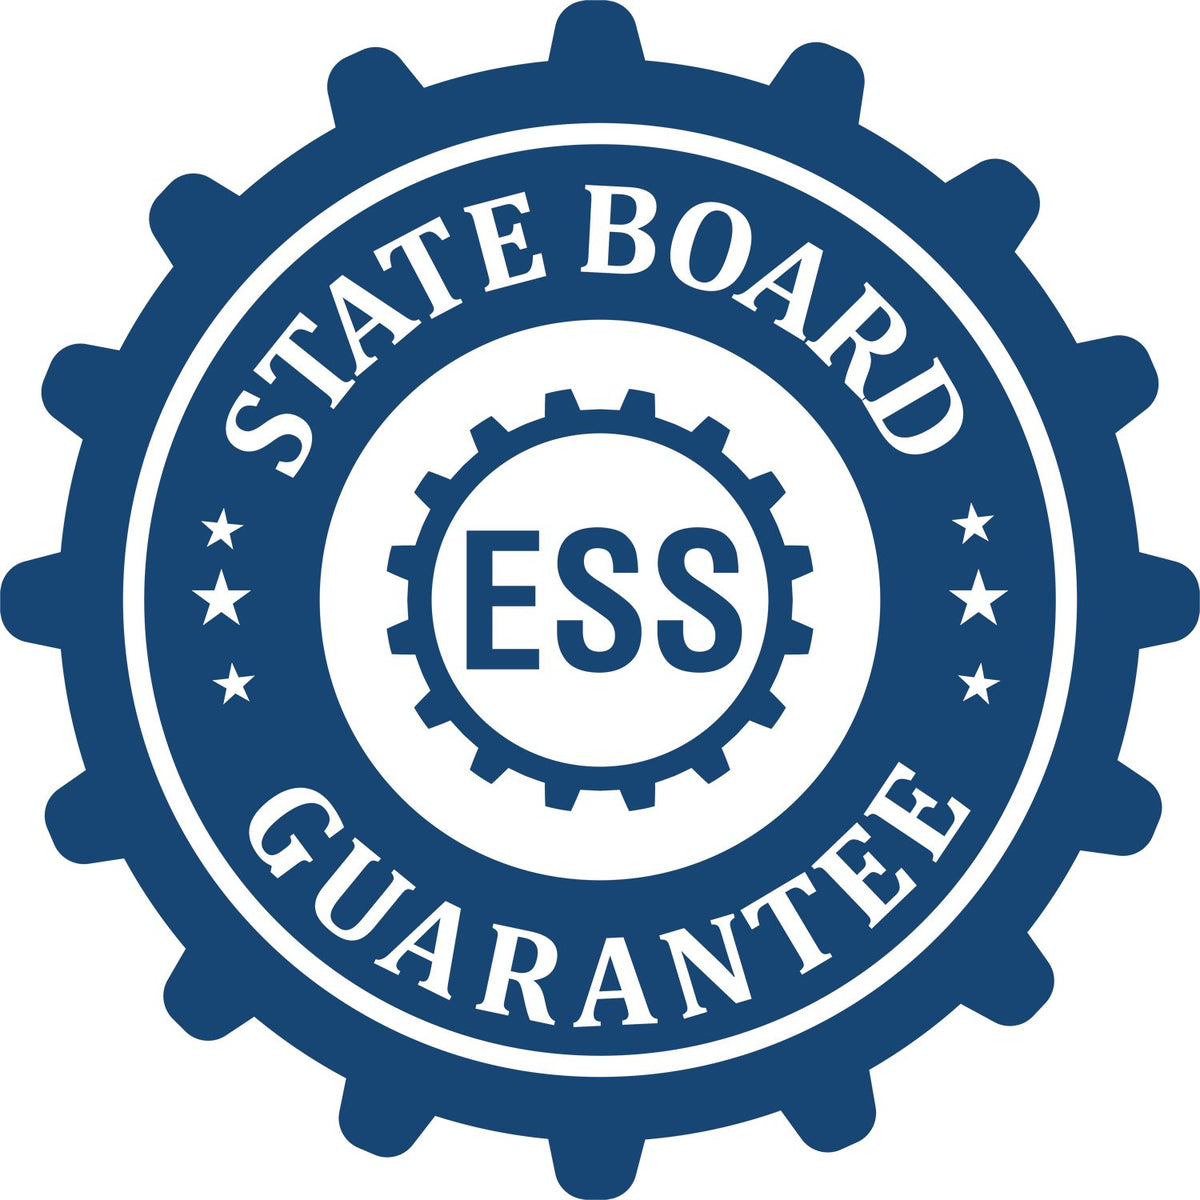 An emblem in a gear shape illustrating a state board guarantee for the Wooden Handle Colorado Rectangular Notary Public Stamp product.